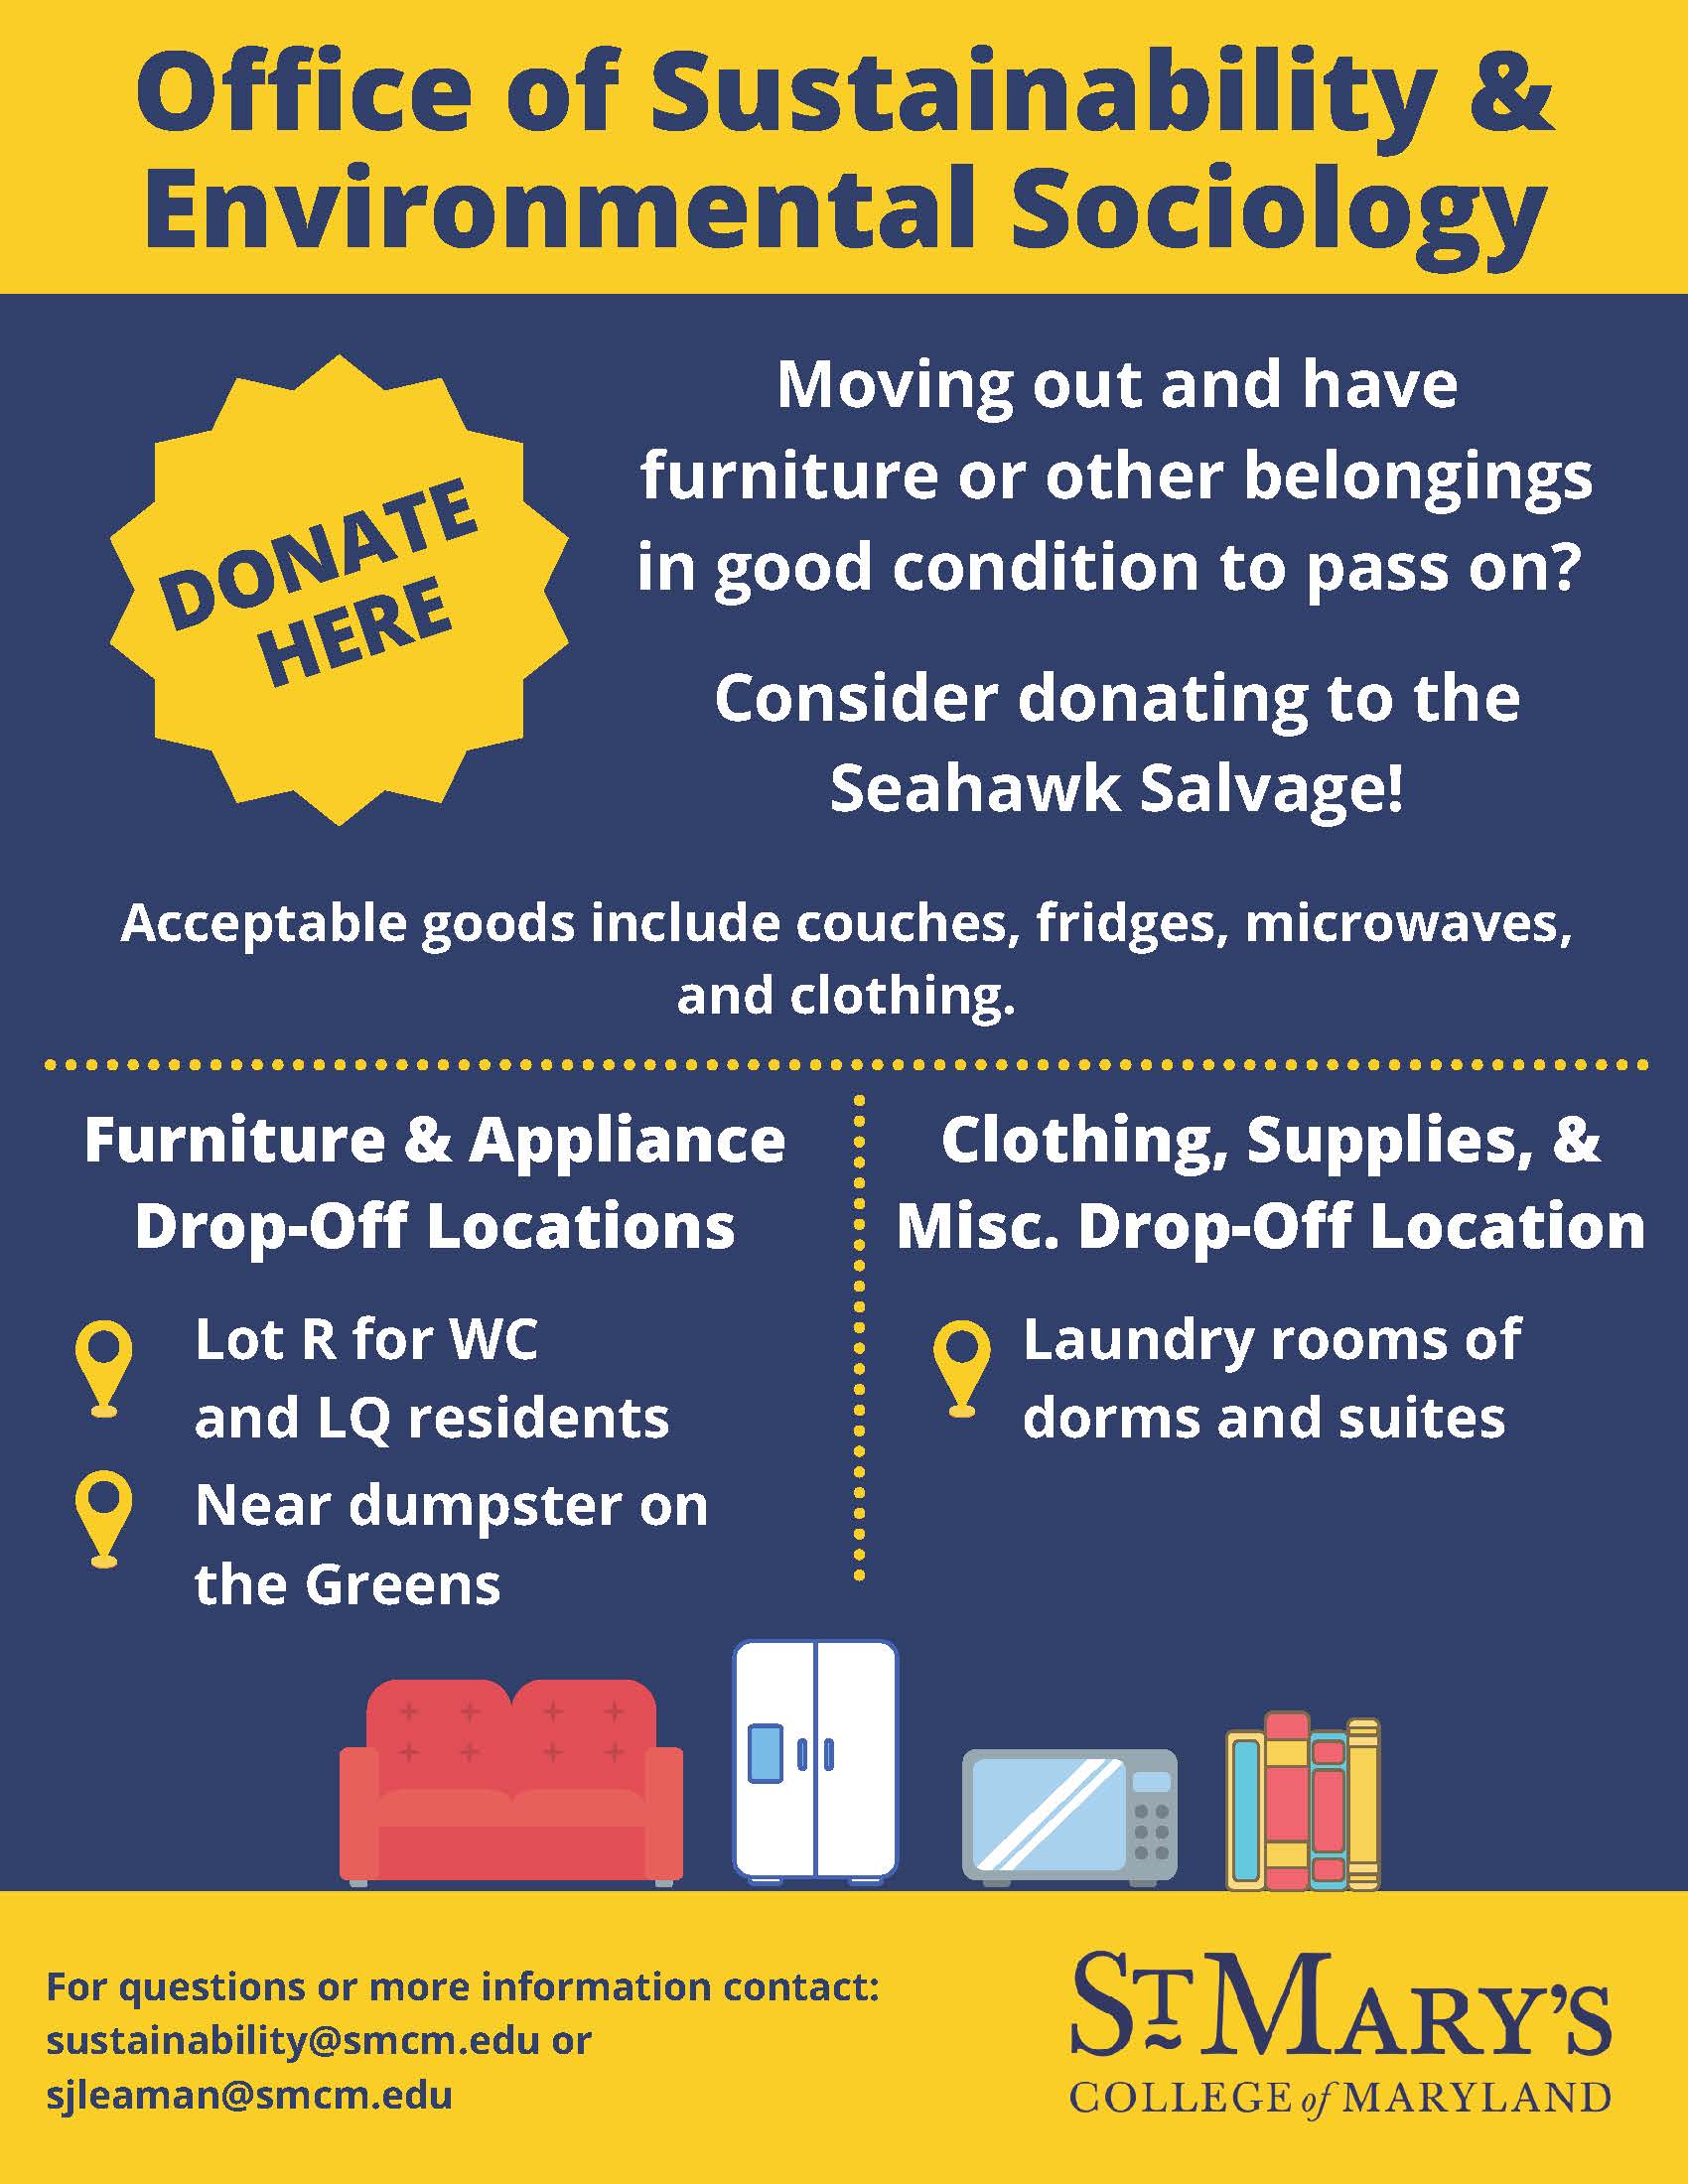 Moving out? Do you have items you no longer need and would like to pass on? Donate your furniture or other household objects to Seahawk Salvage!